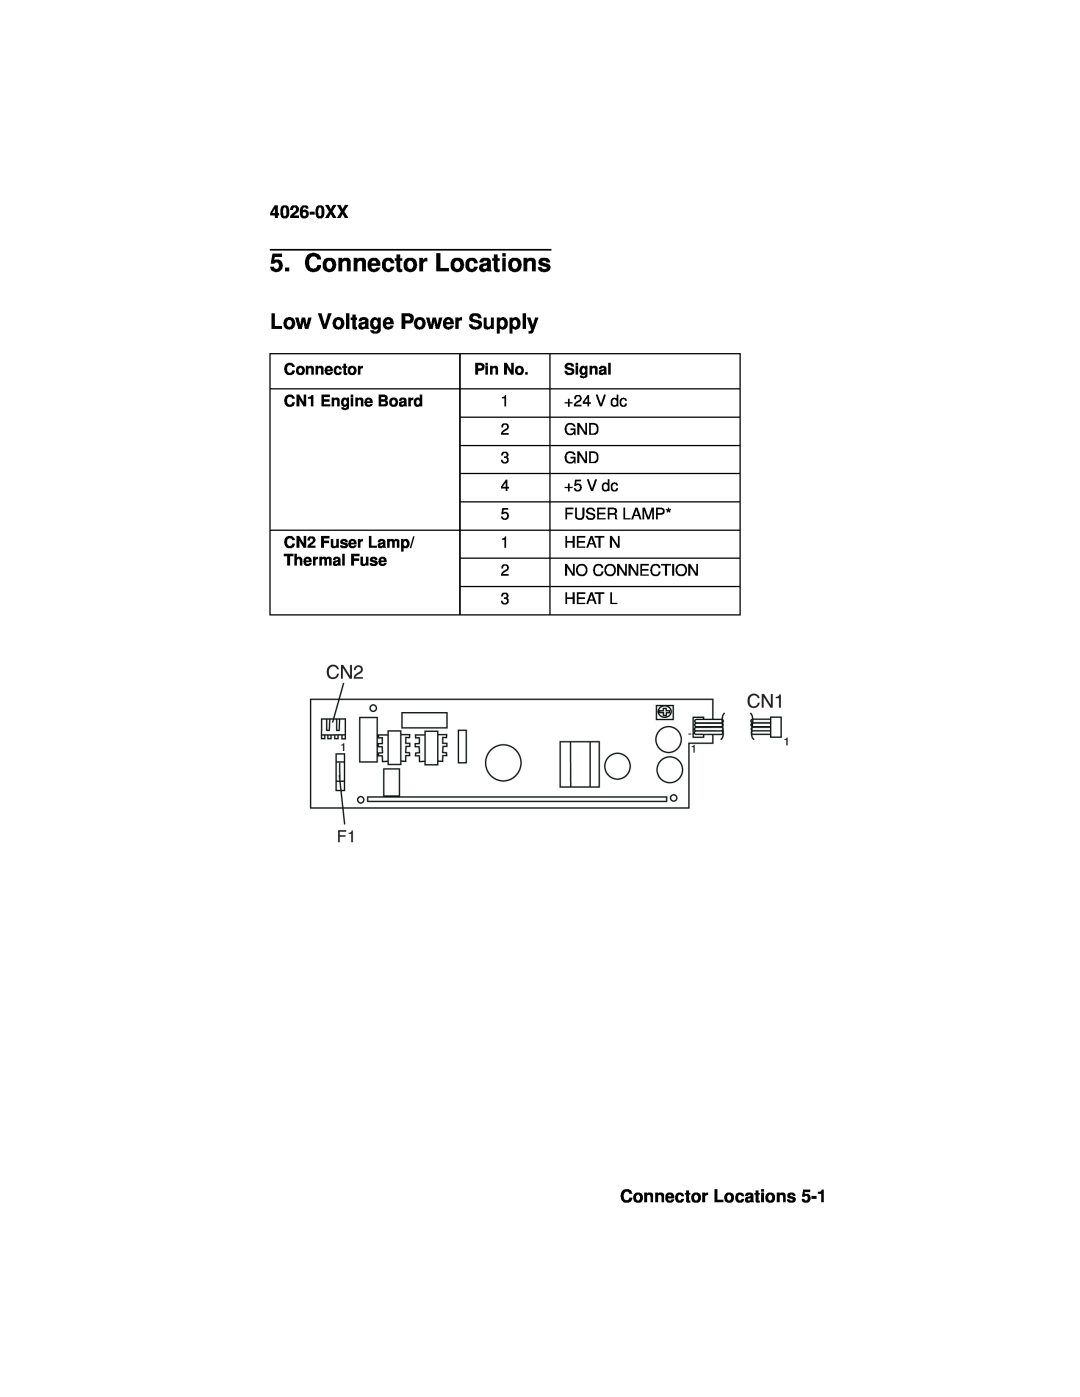 Lexmark OptraTM manual Connector Locations, Low Voltage Power Supply, 4026-0XX 